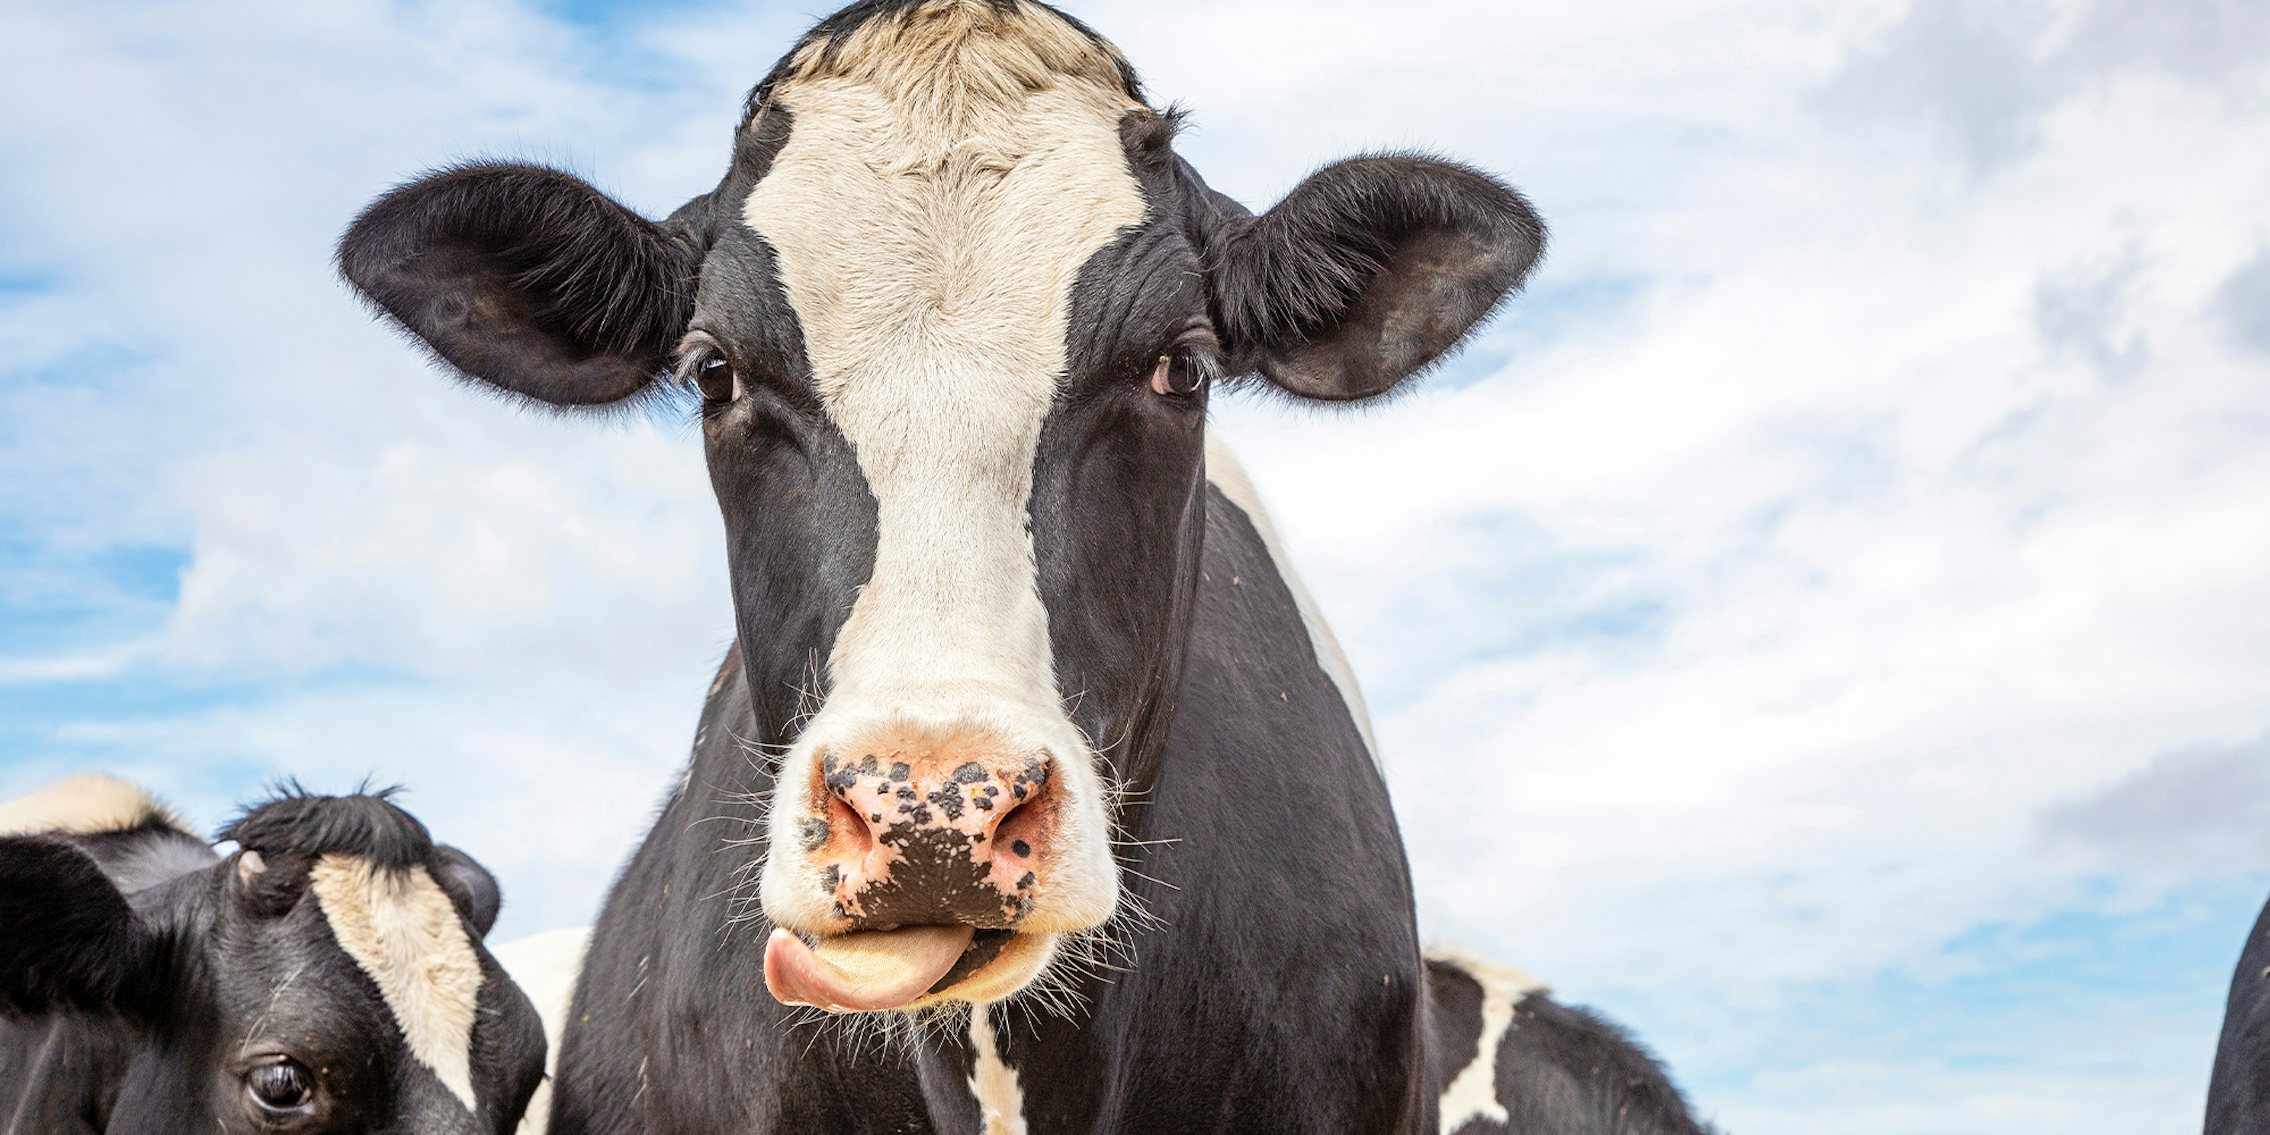 cow licks her lips off with her tongue far out and a blue sky background